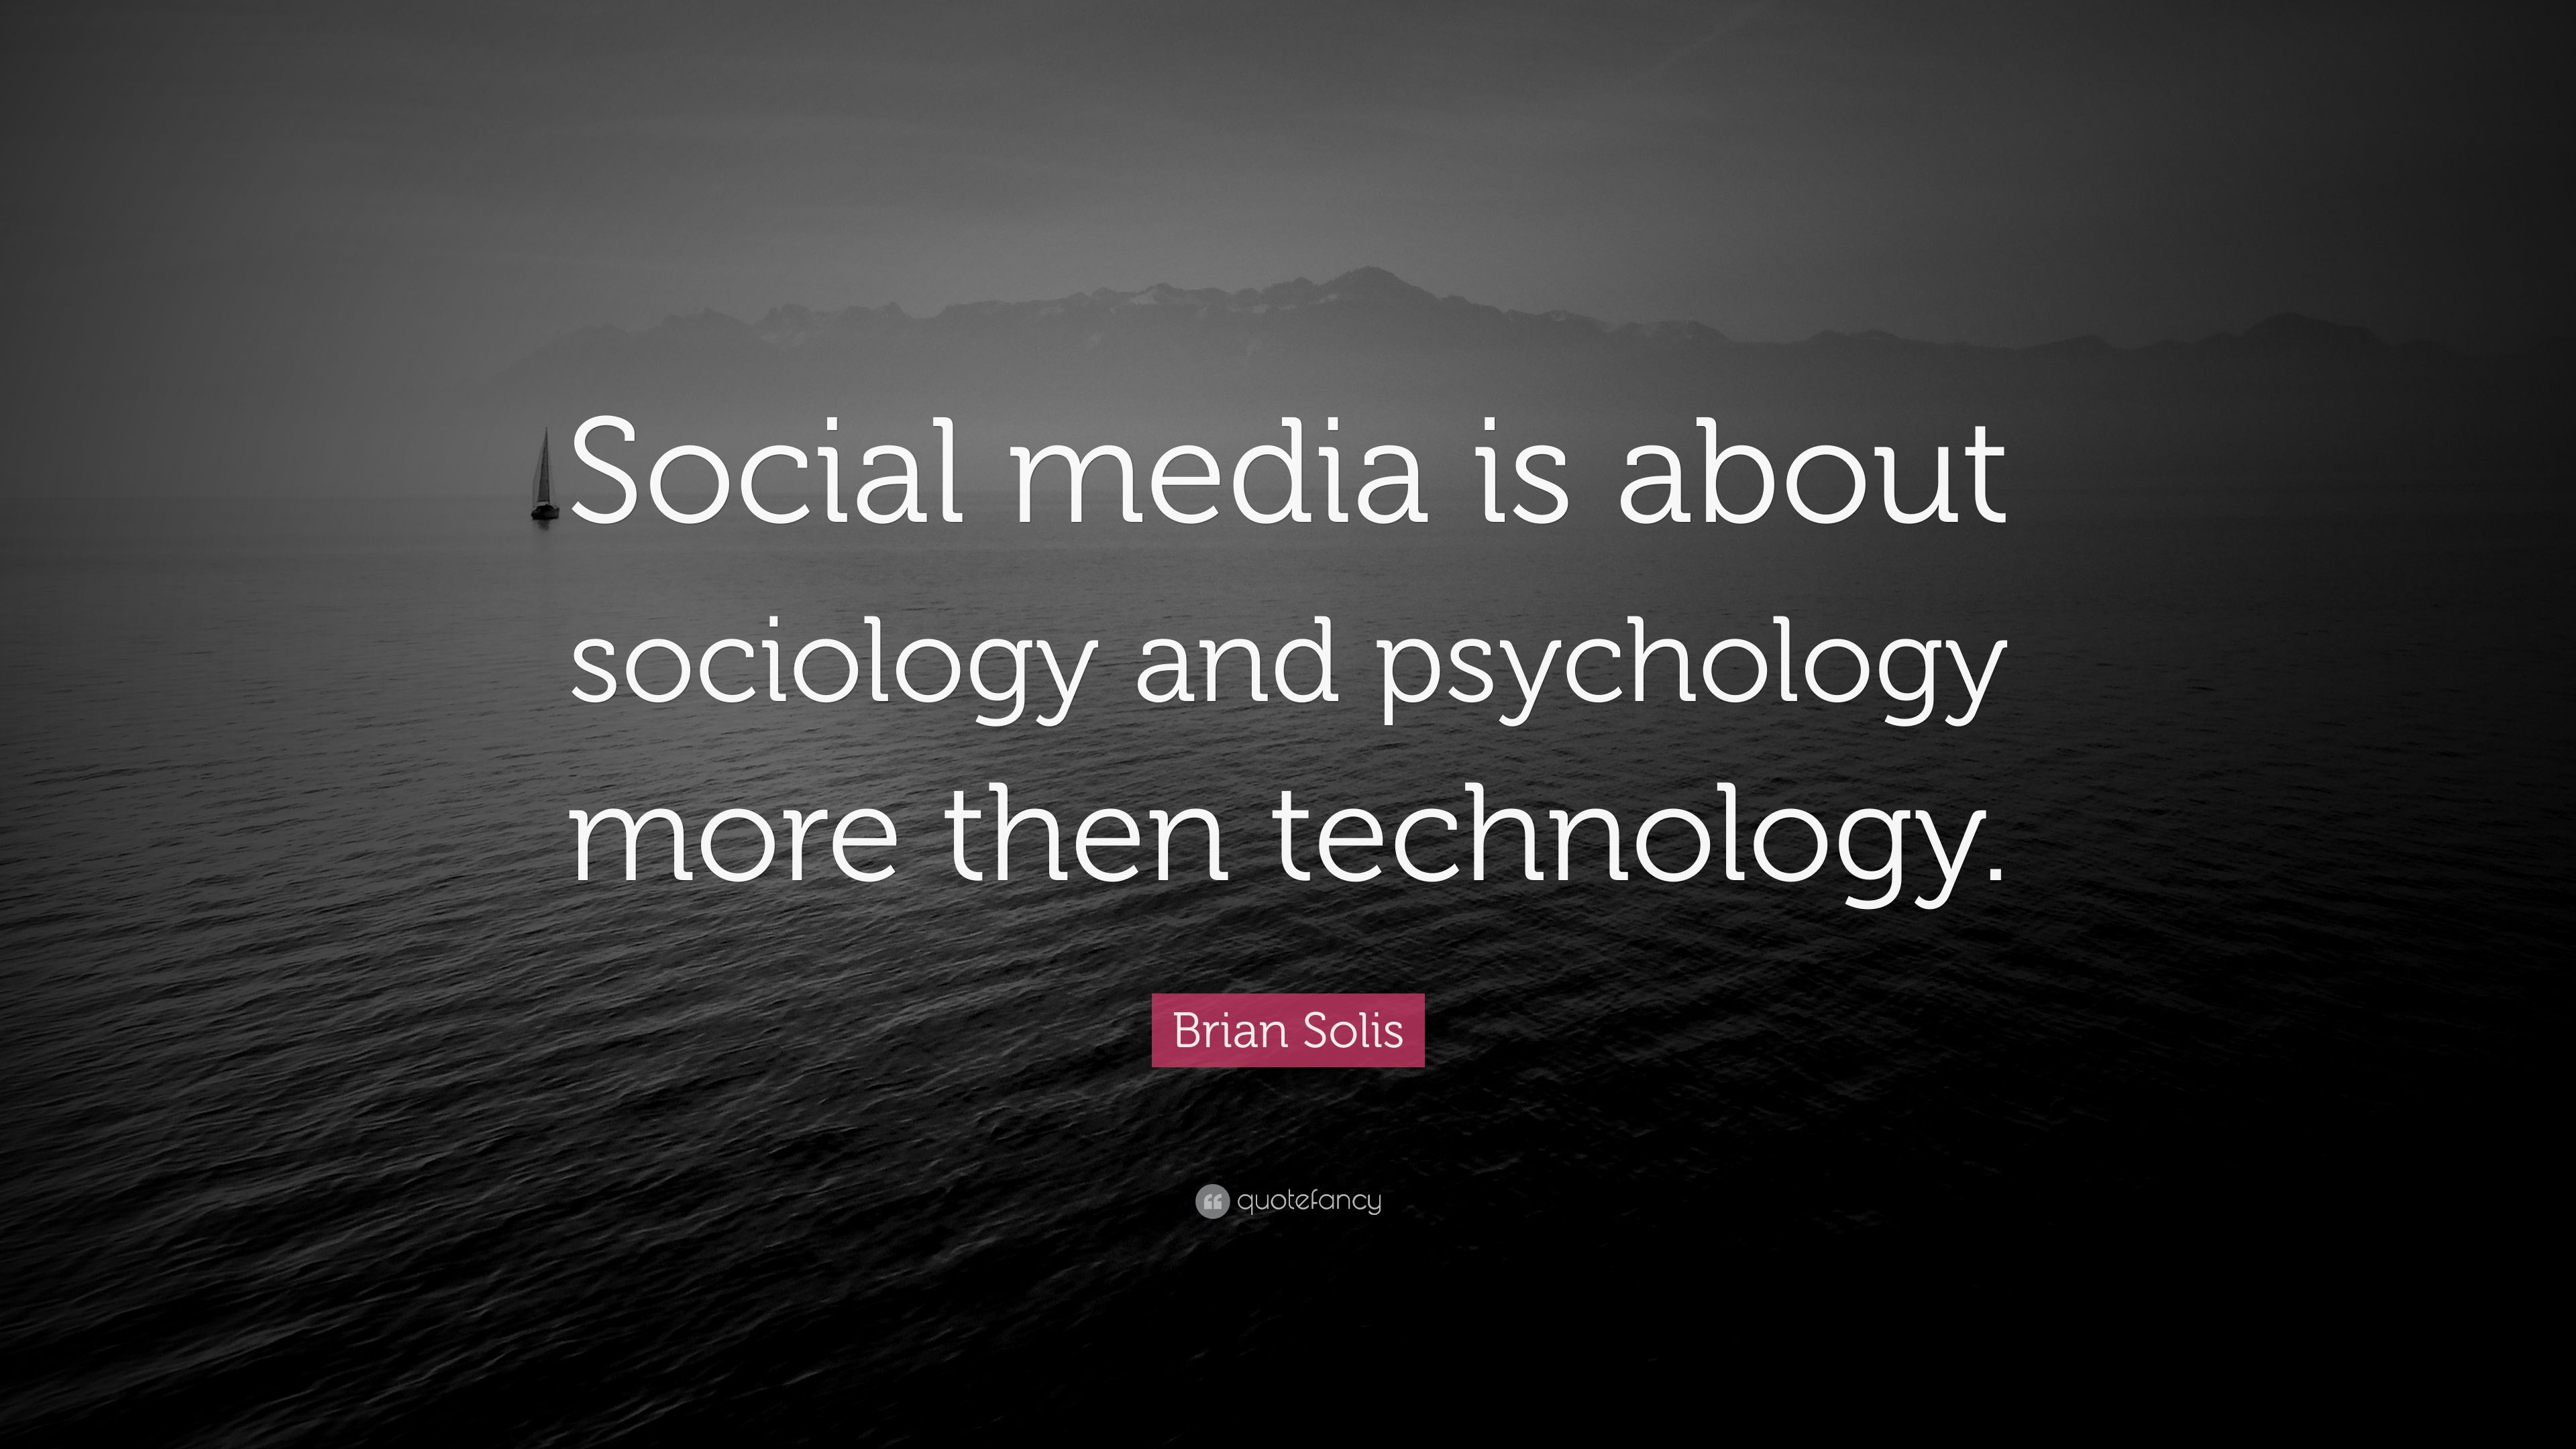 Brian Solis Quote: “Social media is about sociology and psychology more then technology.” (7 wallpaper)